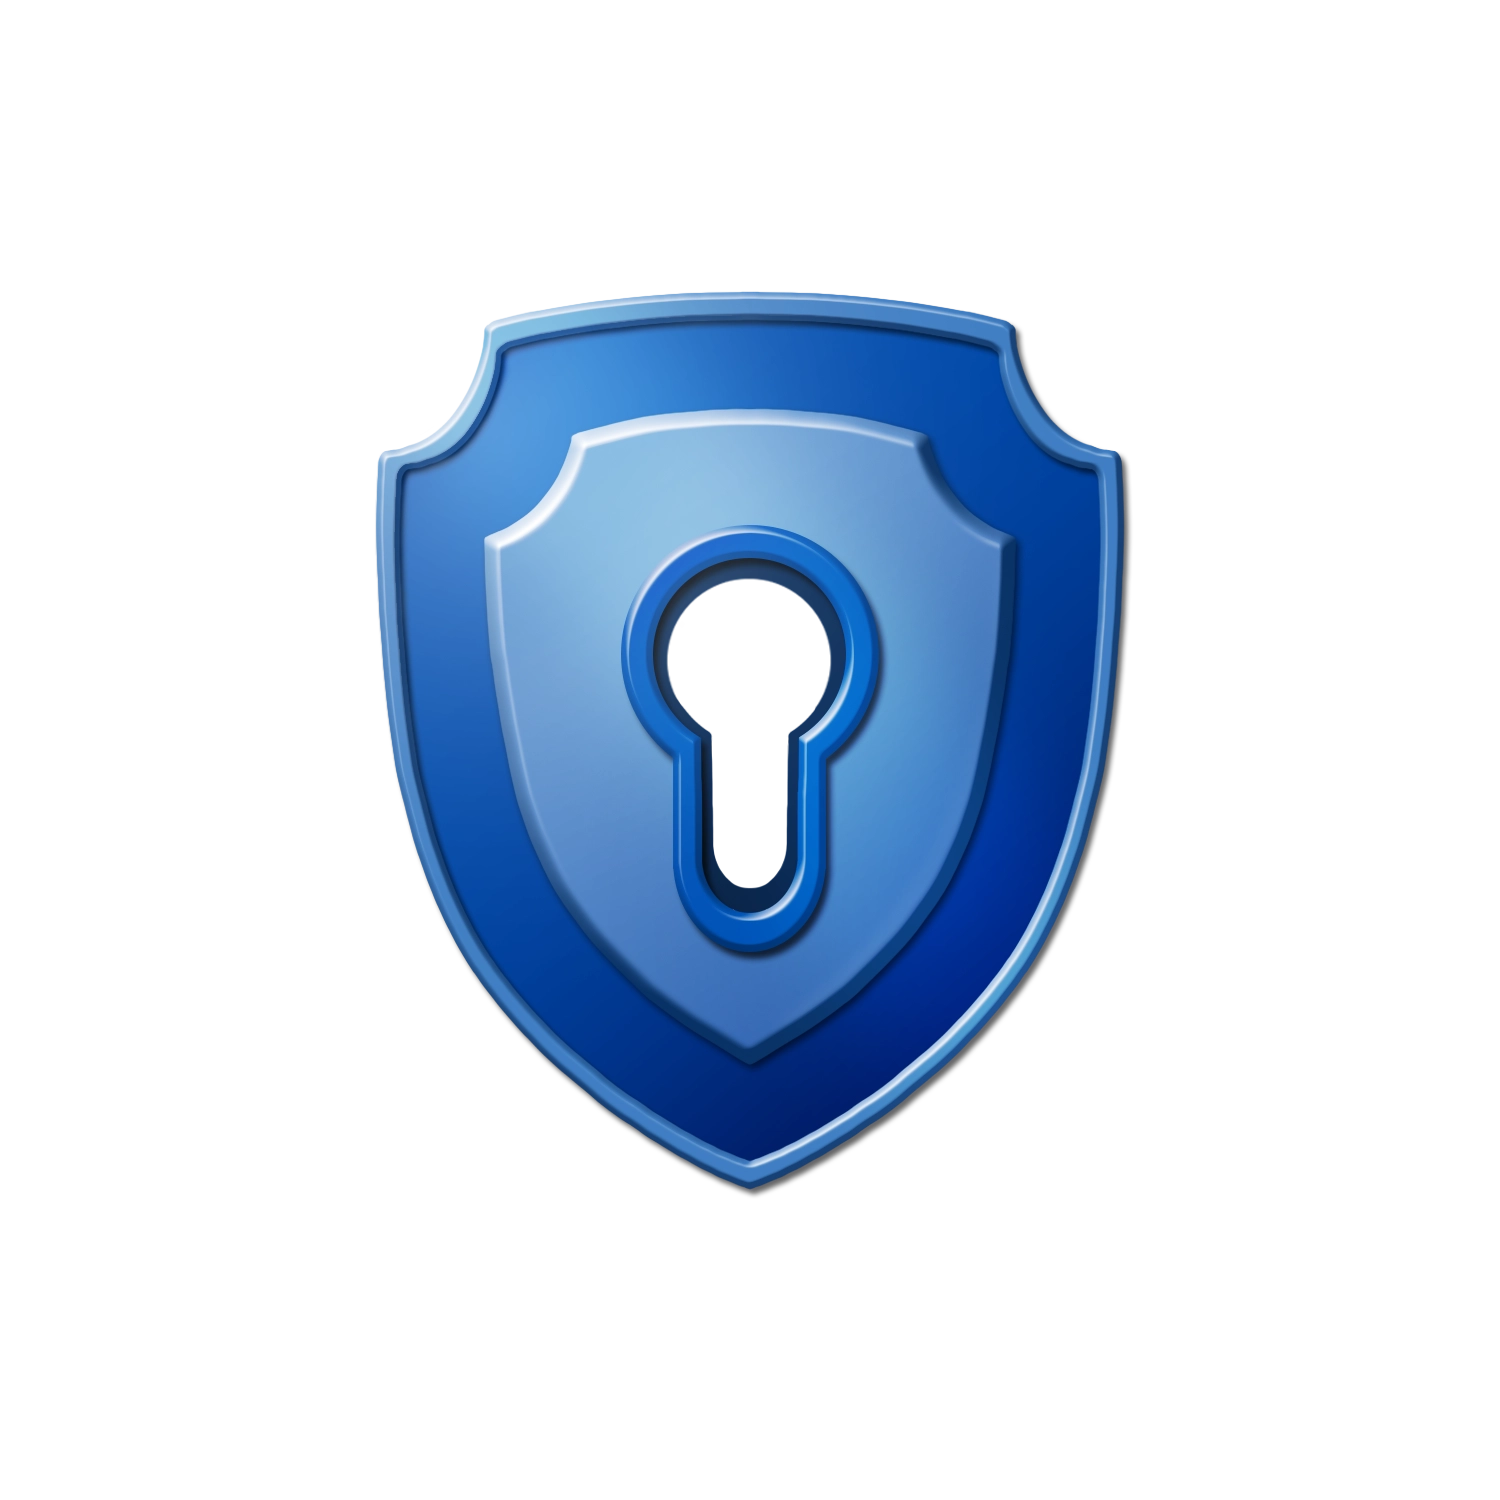 Packlock in a blue shield showing safety icon